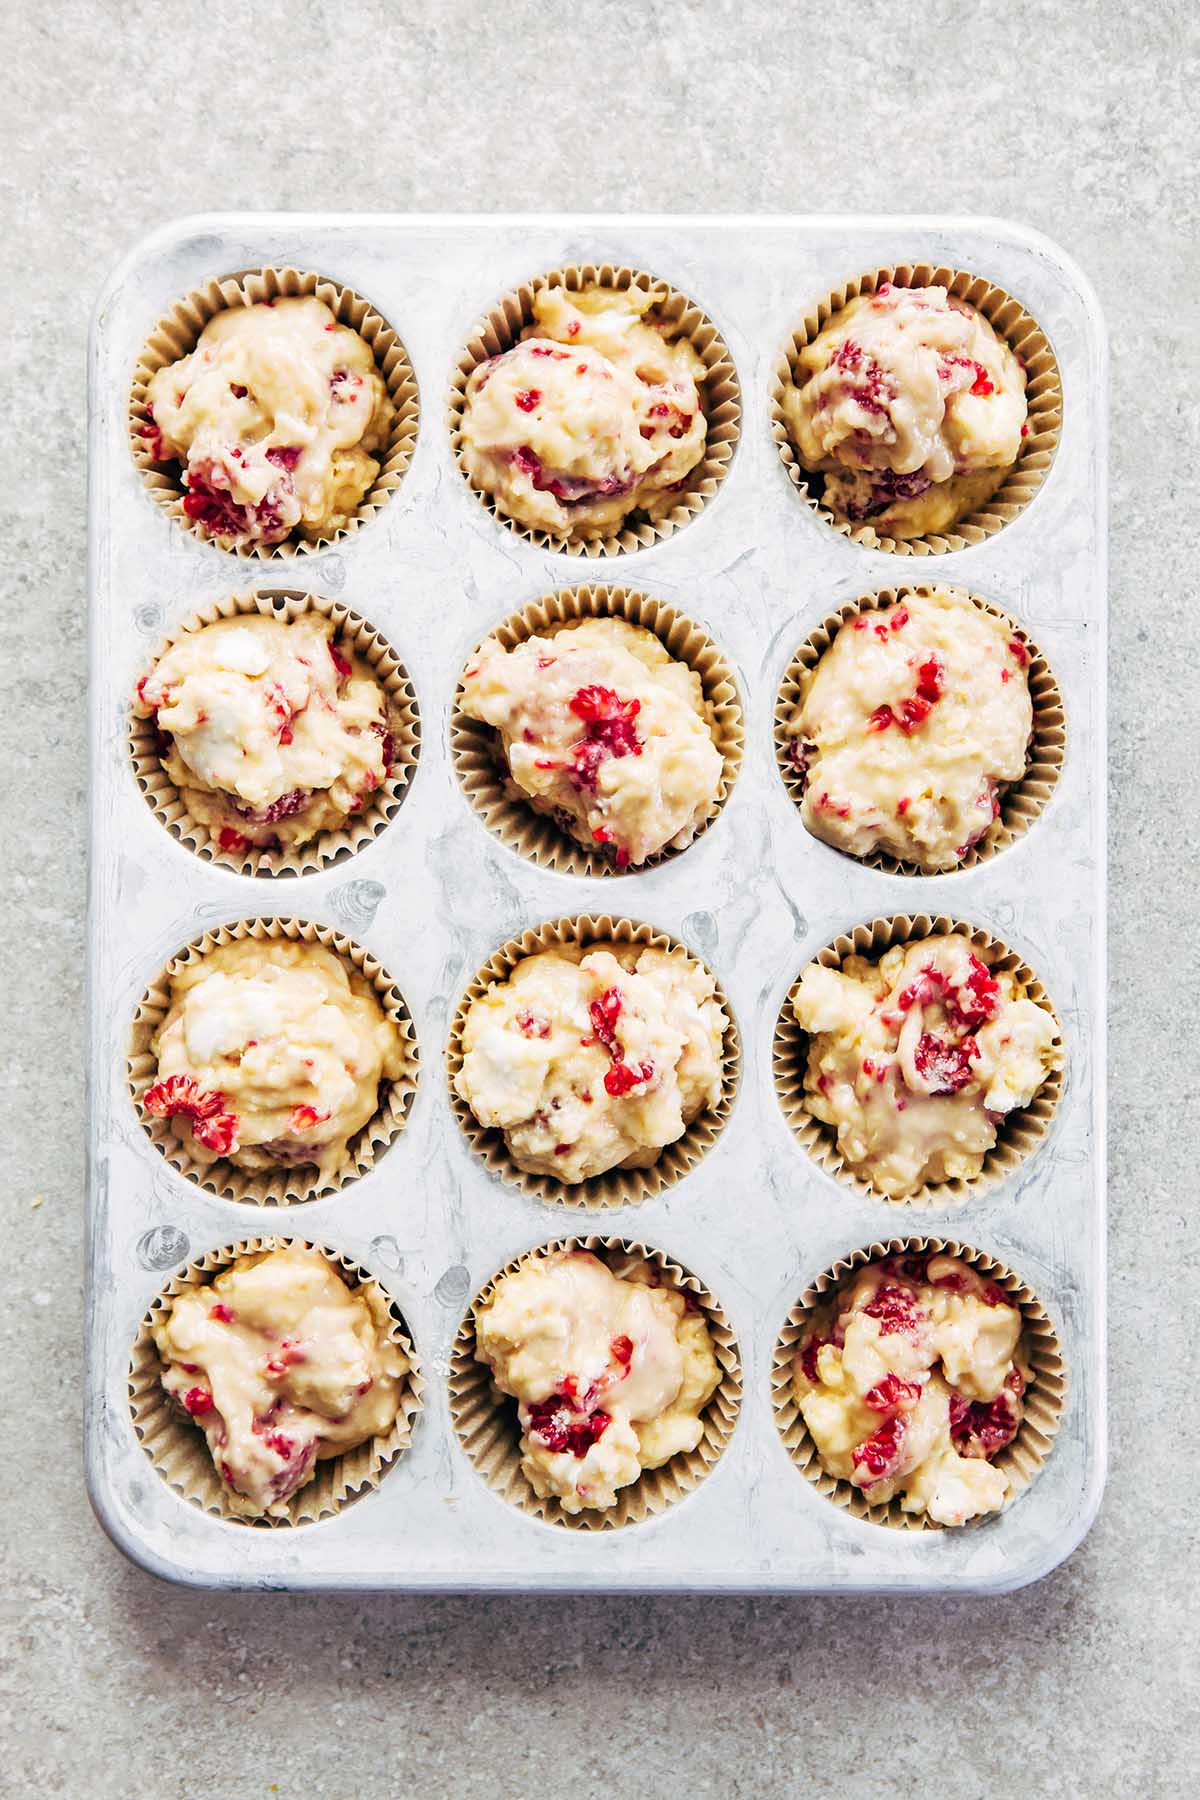 12 unbaked muffins in a tin.